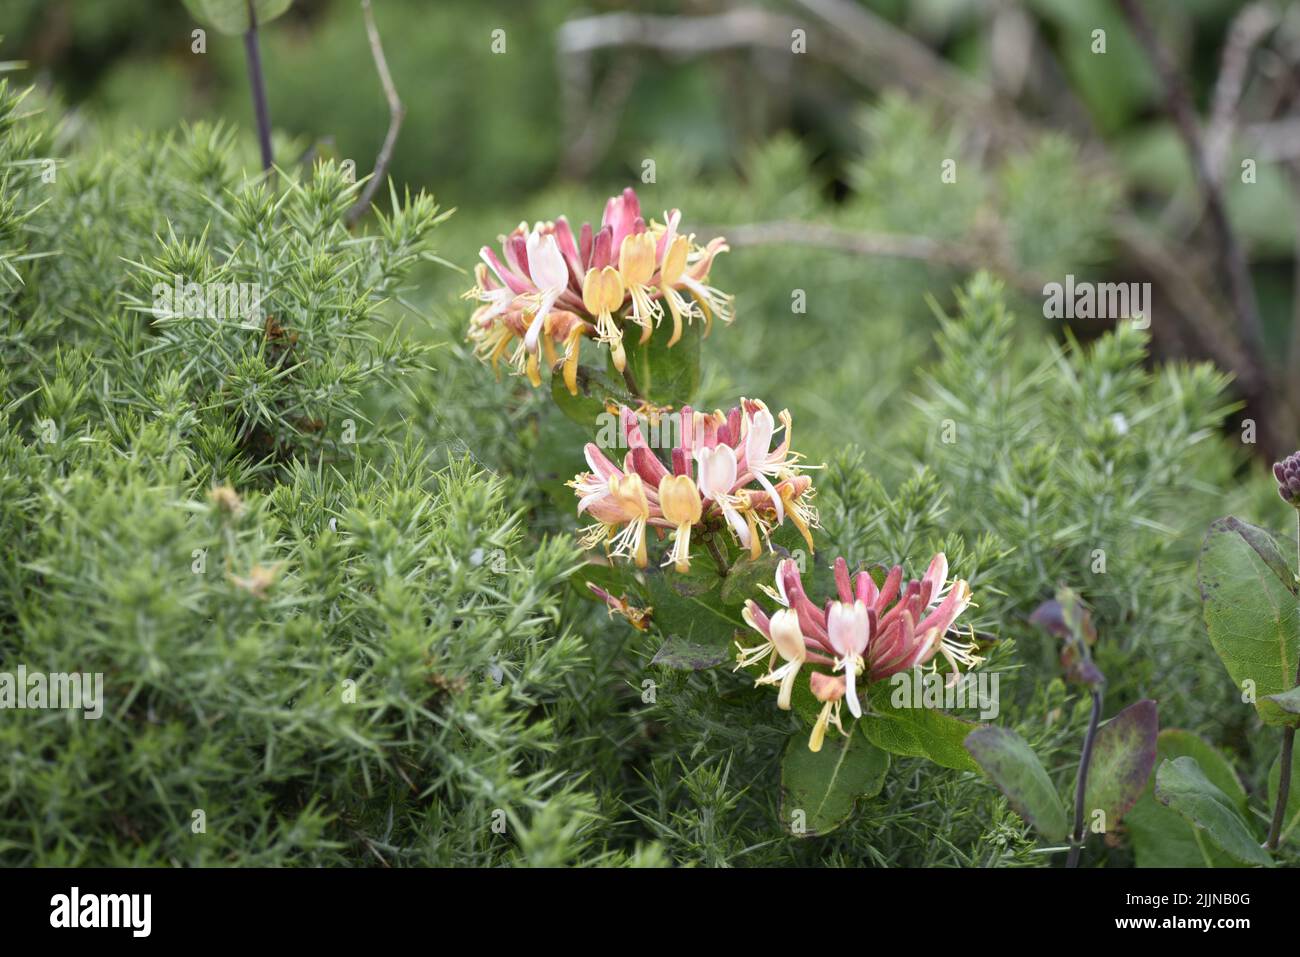 Image of Three Wild Honeysuckle (Lonicera periclymenum) in a Diagonal Row, From Right to Left, Against a Green Foliage Background Take in June, UK Stock Photo